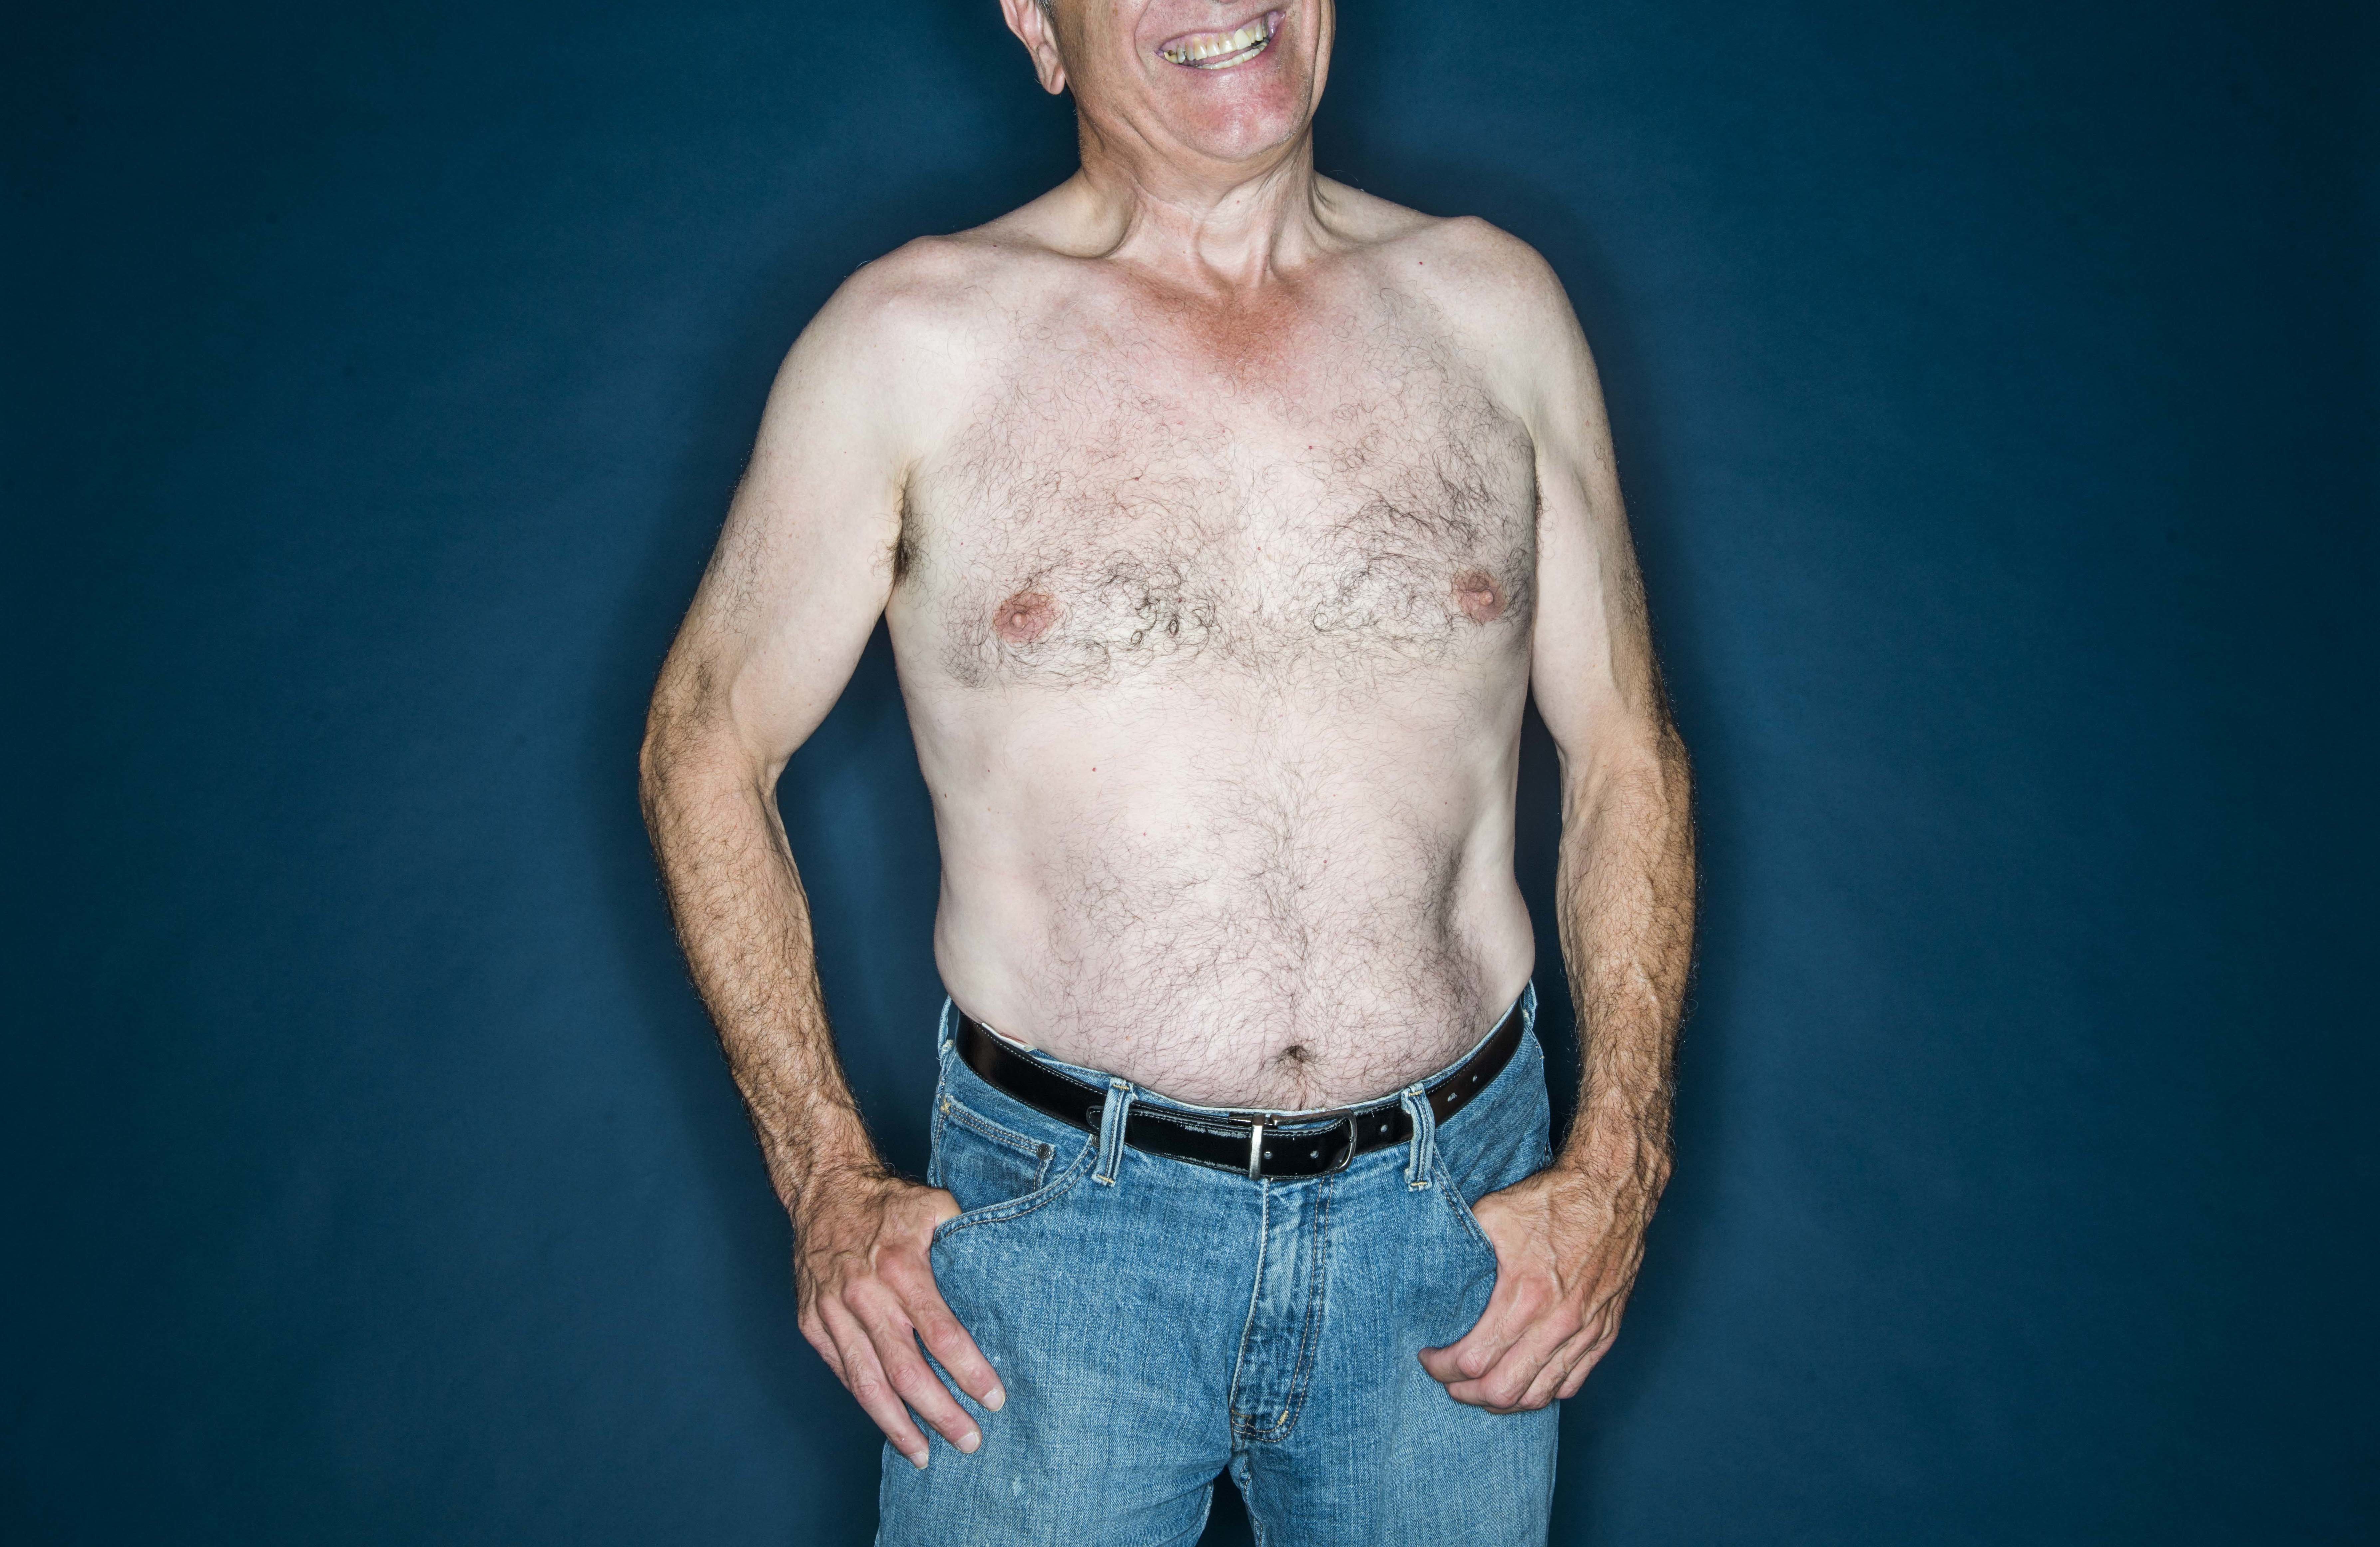 19 Men Go Shirtless And Share Their Body Image Struggles